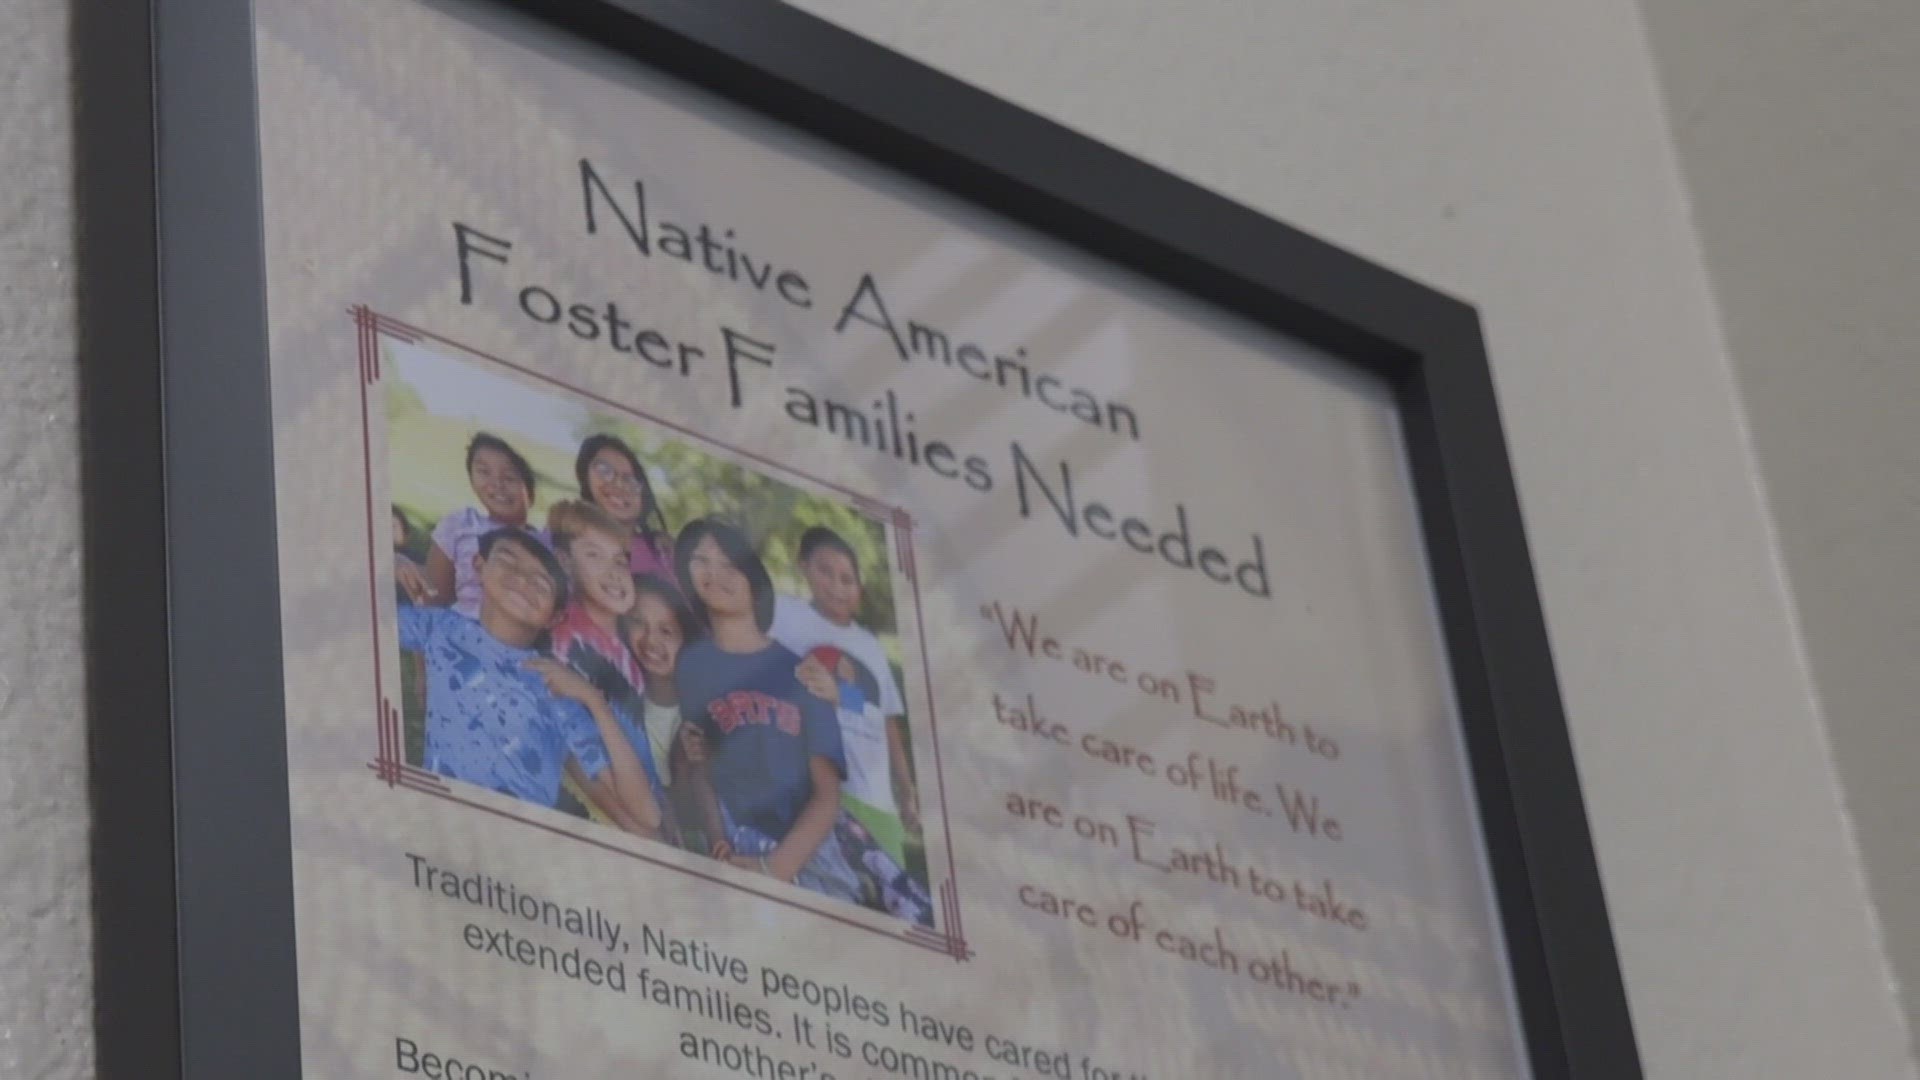 Right now the community only has 10 foster families and is looking for more to help care for and be culturally sensitive to kids’ needs.